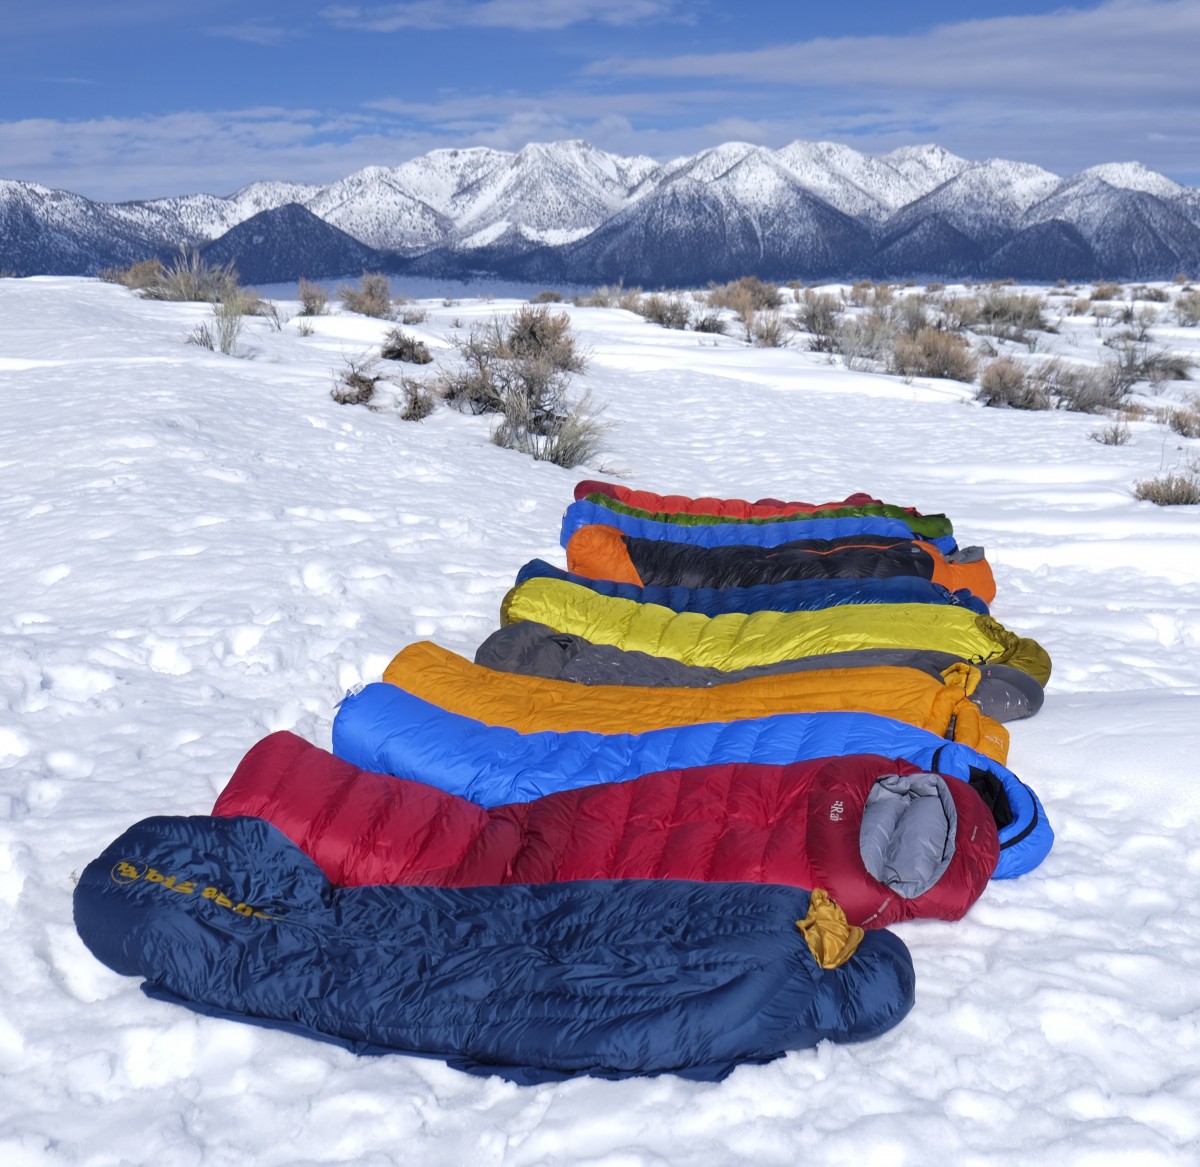 How to Choose a Winter Sleeping Bag